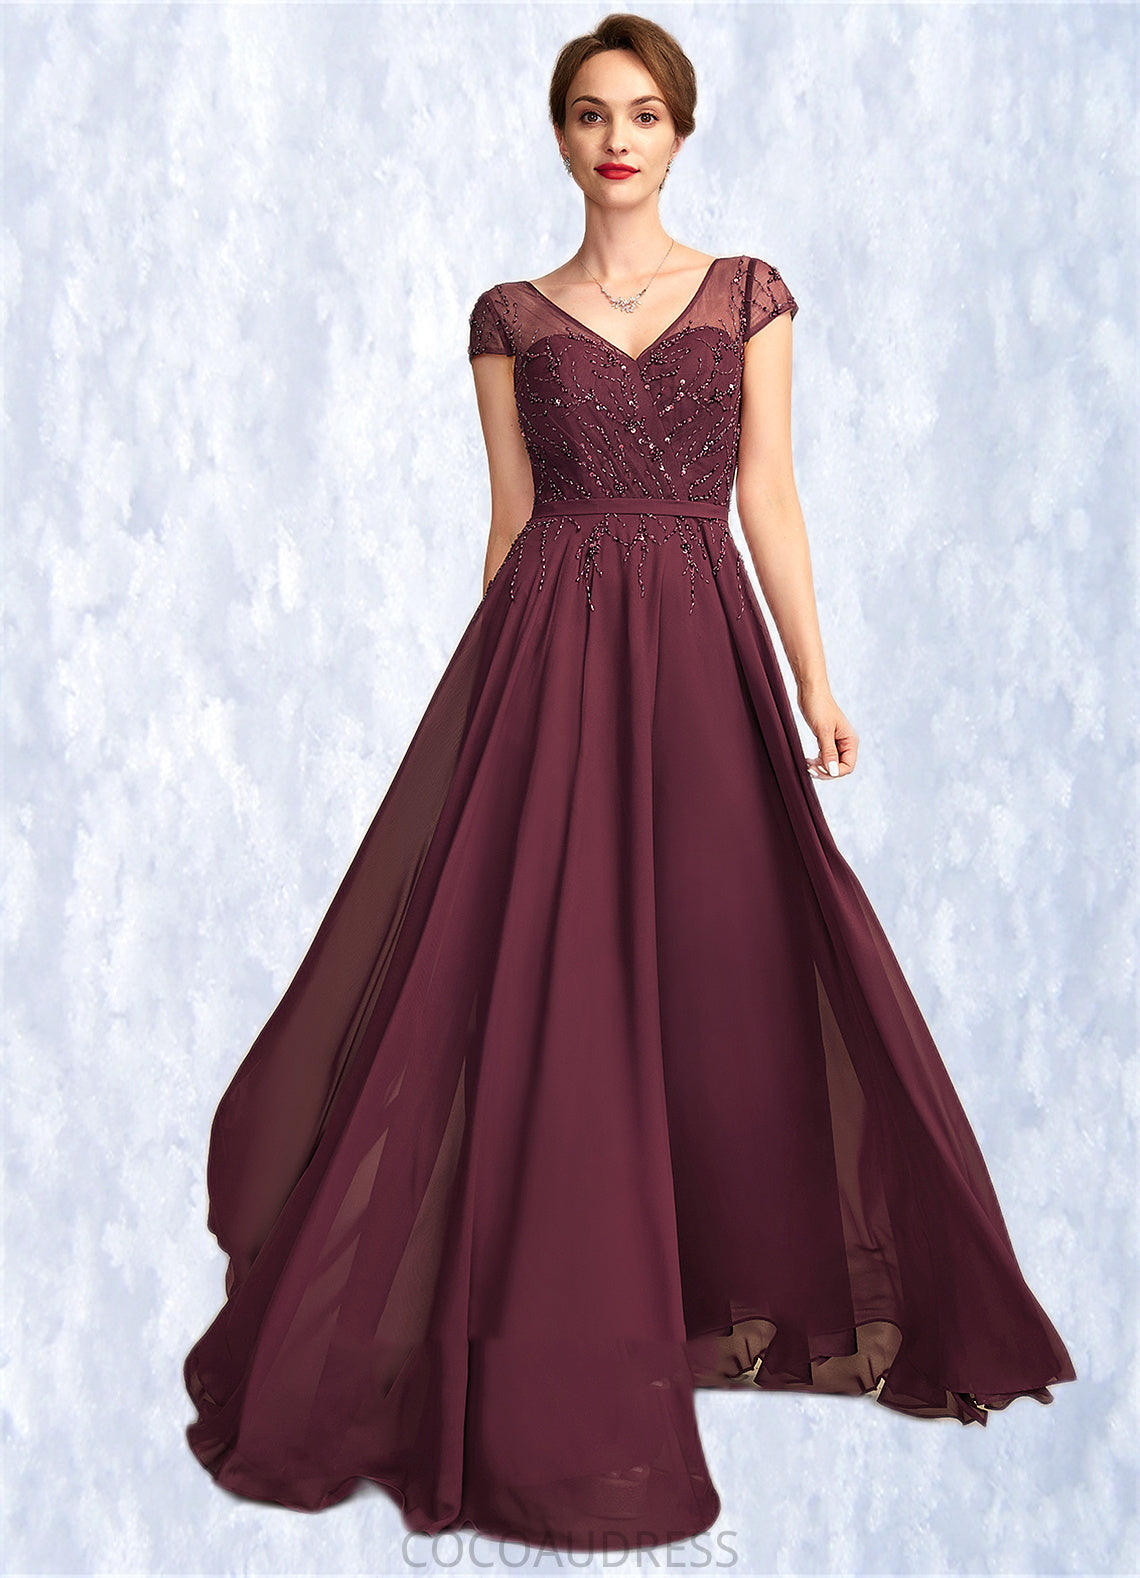 Giuliana A-Line V-neck Floor-Length Chiffon Mother of the Bride Dress With Beading Sequins 126P0015028